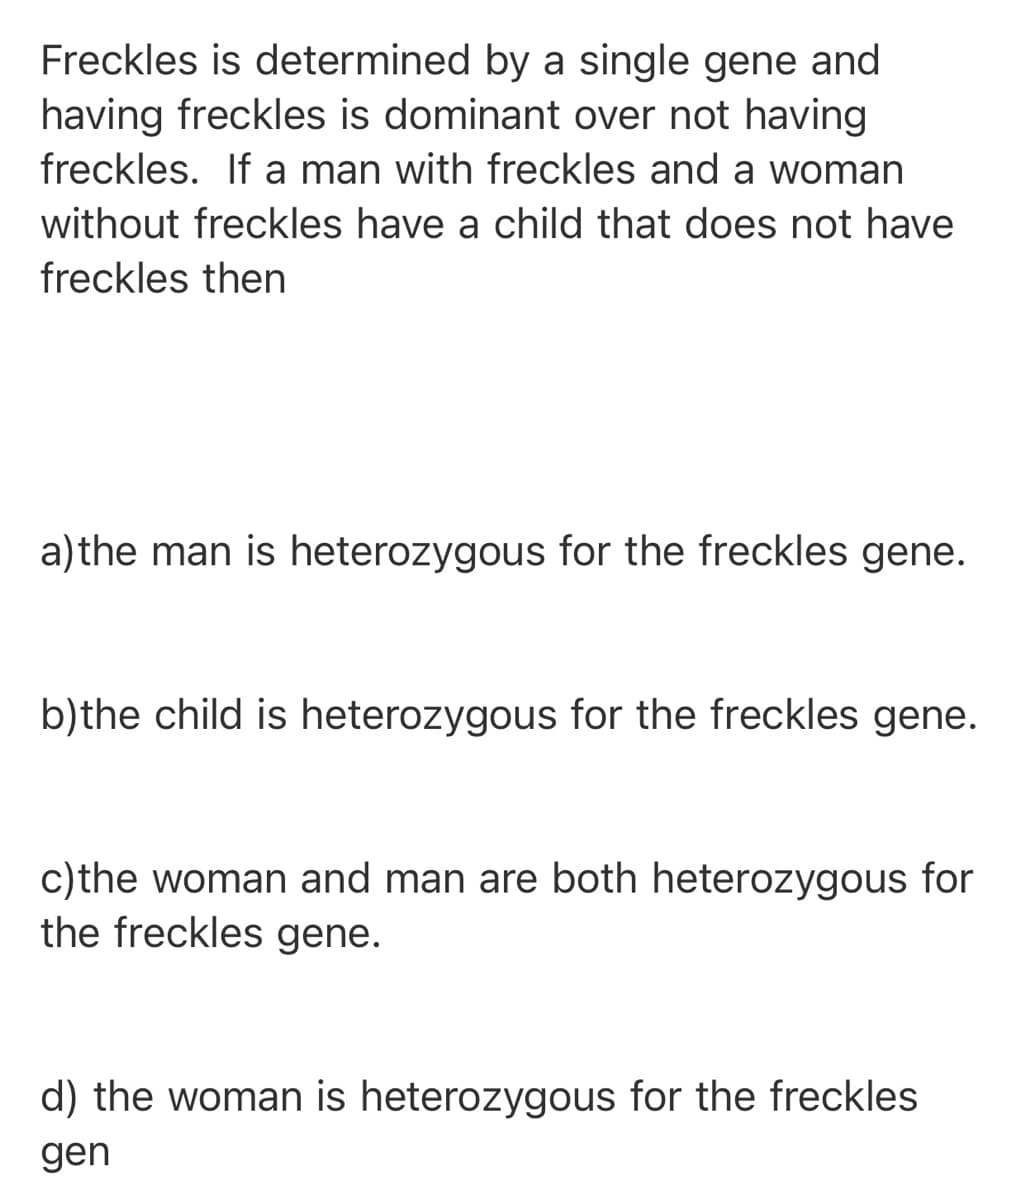 Freckles is determined by a single gene and
having freckles is dominant over not having
freckles. If a man with freckles and a woman
without freckles have a child that does not have
freckles then
a)the man is heterozygous for the freckles gene.
b)the child is heterozygous for the freckles gene.
c)the woman and man are both heterozygous for
the freckles gene.
d) the woman is heterozygous for the freckles
gen
